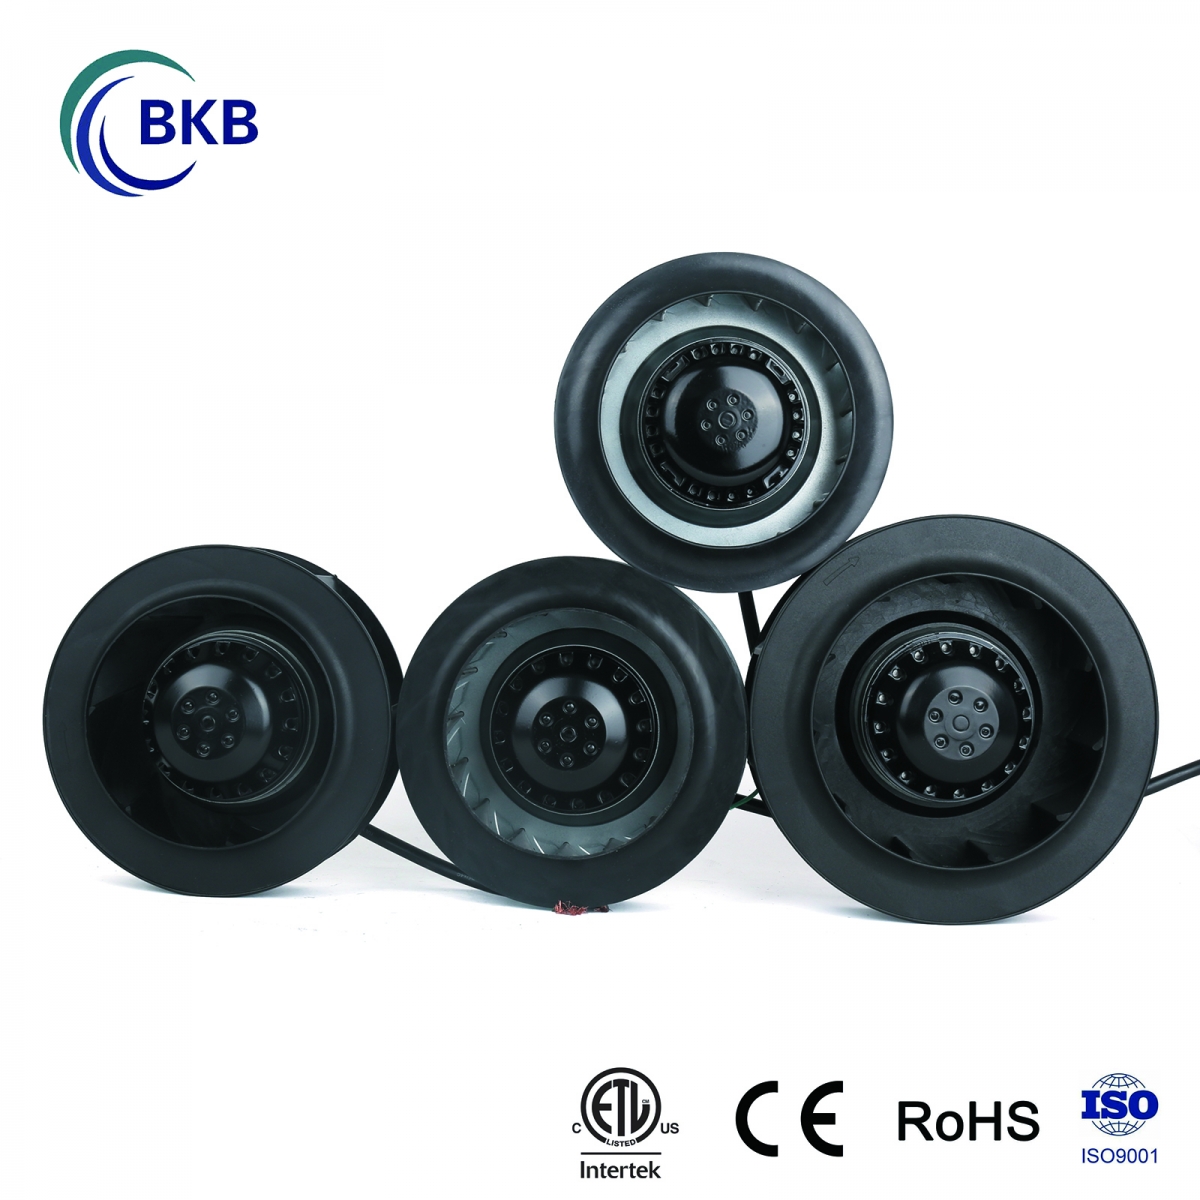 centrifugal fans are usually compared with axial fans.-SUNLIGHT BLOWER,Centrifugal Fans, Inline Fans,Motors,Backward curved centrifugal fans ,Forward curved centrifugal fans ,inlet fans, EC fans